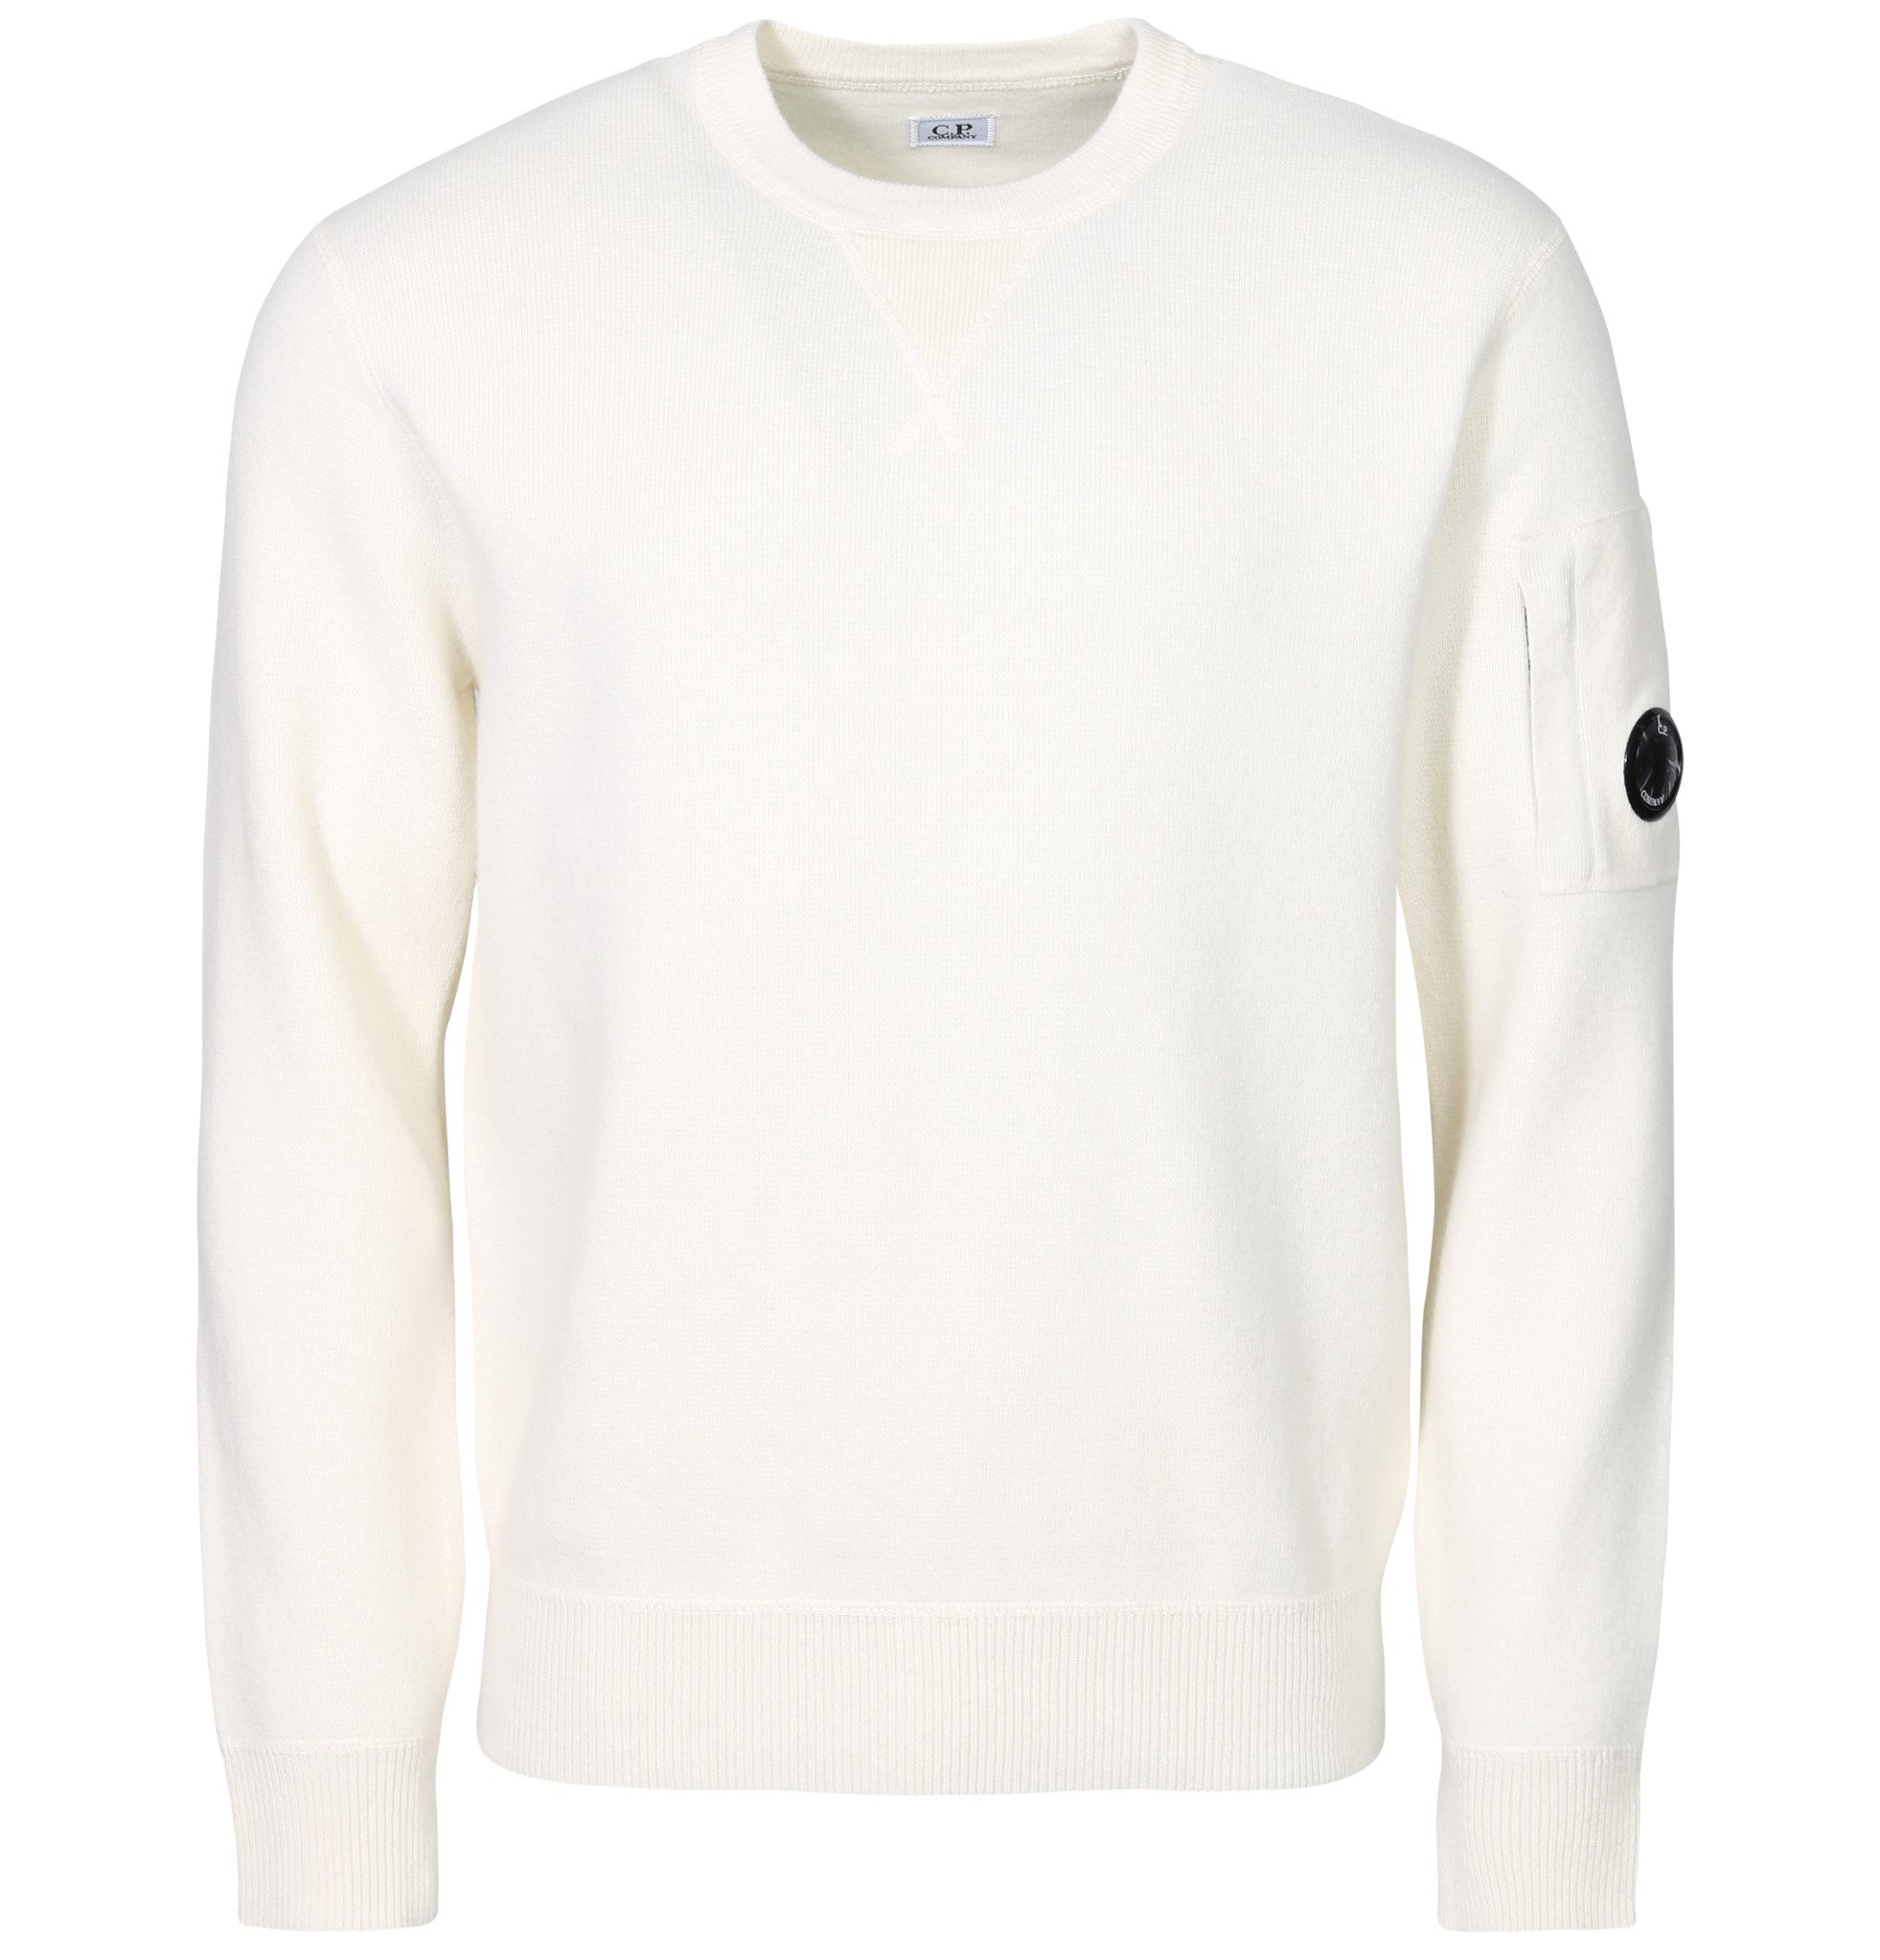 C.P. COMPANY Knit Pullover in Gauze White